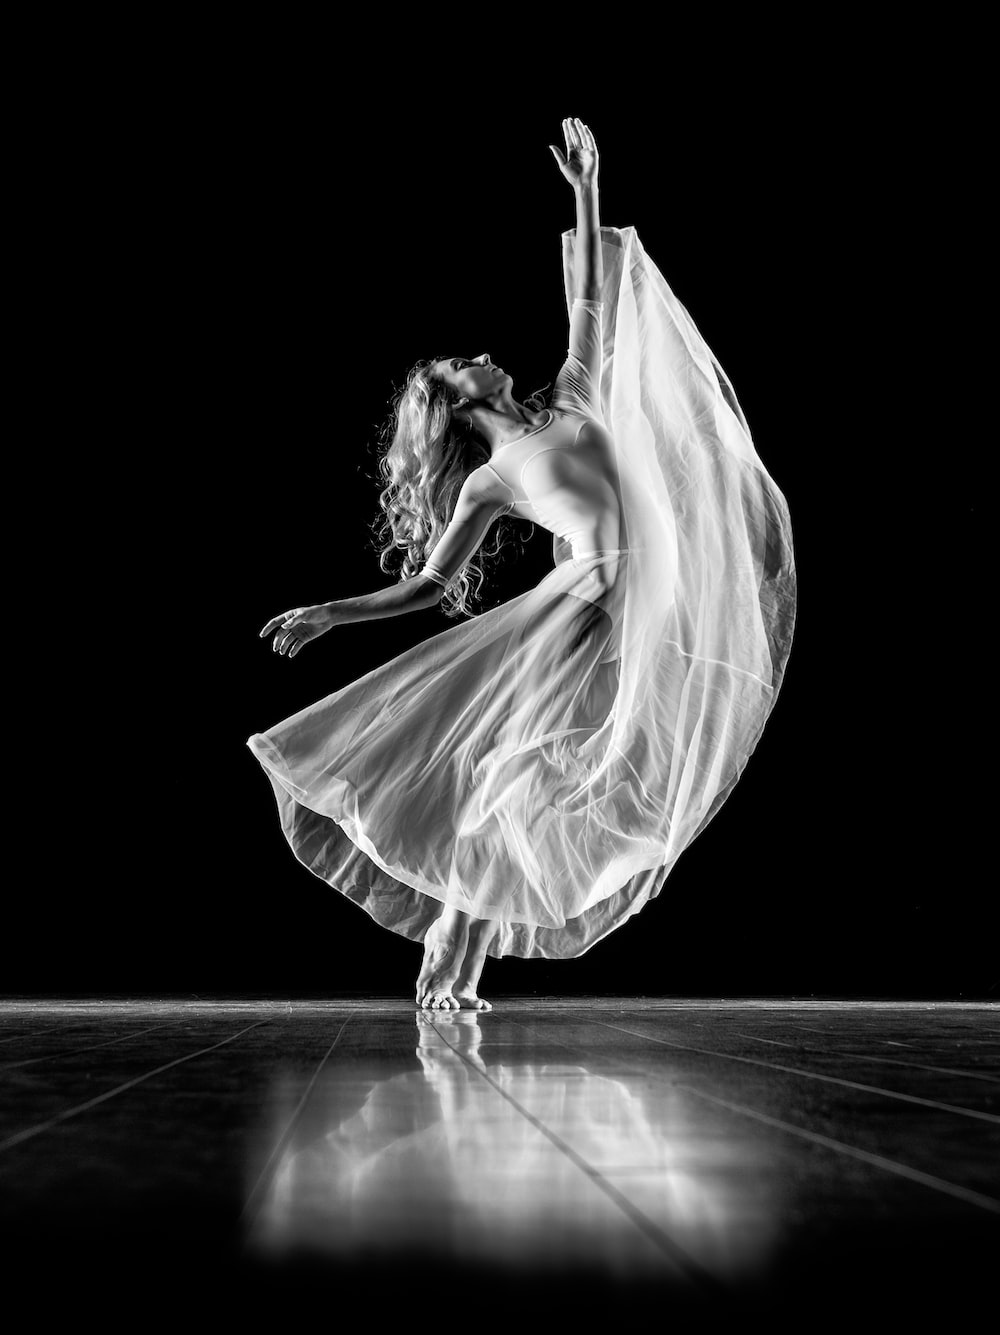 Ballerina Picture. Download Free Image